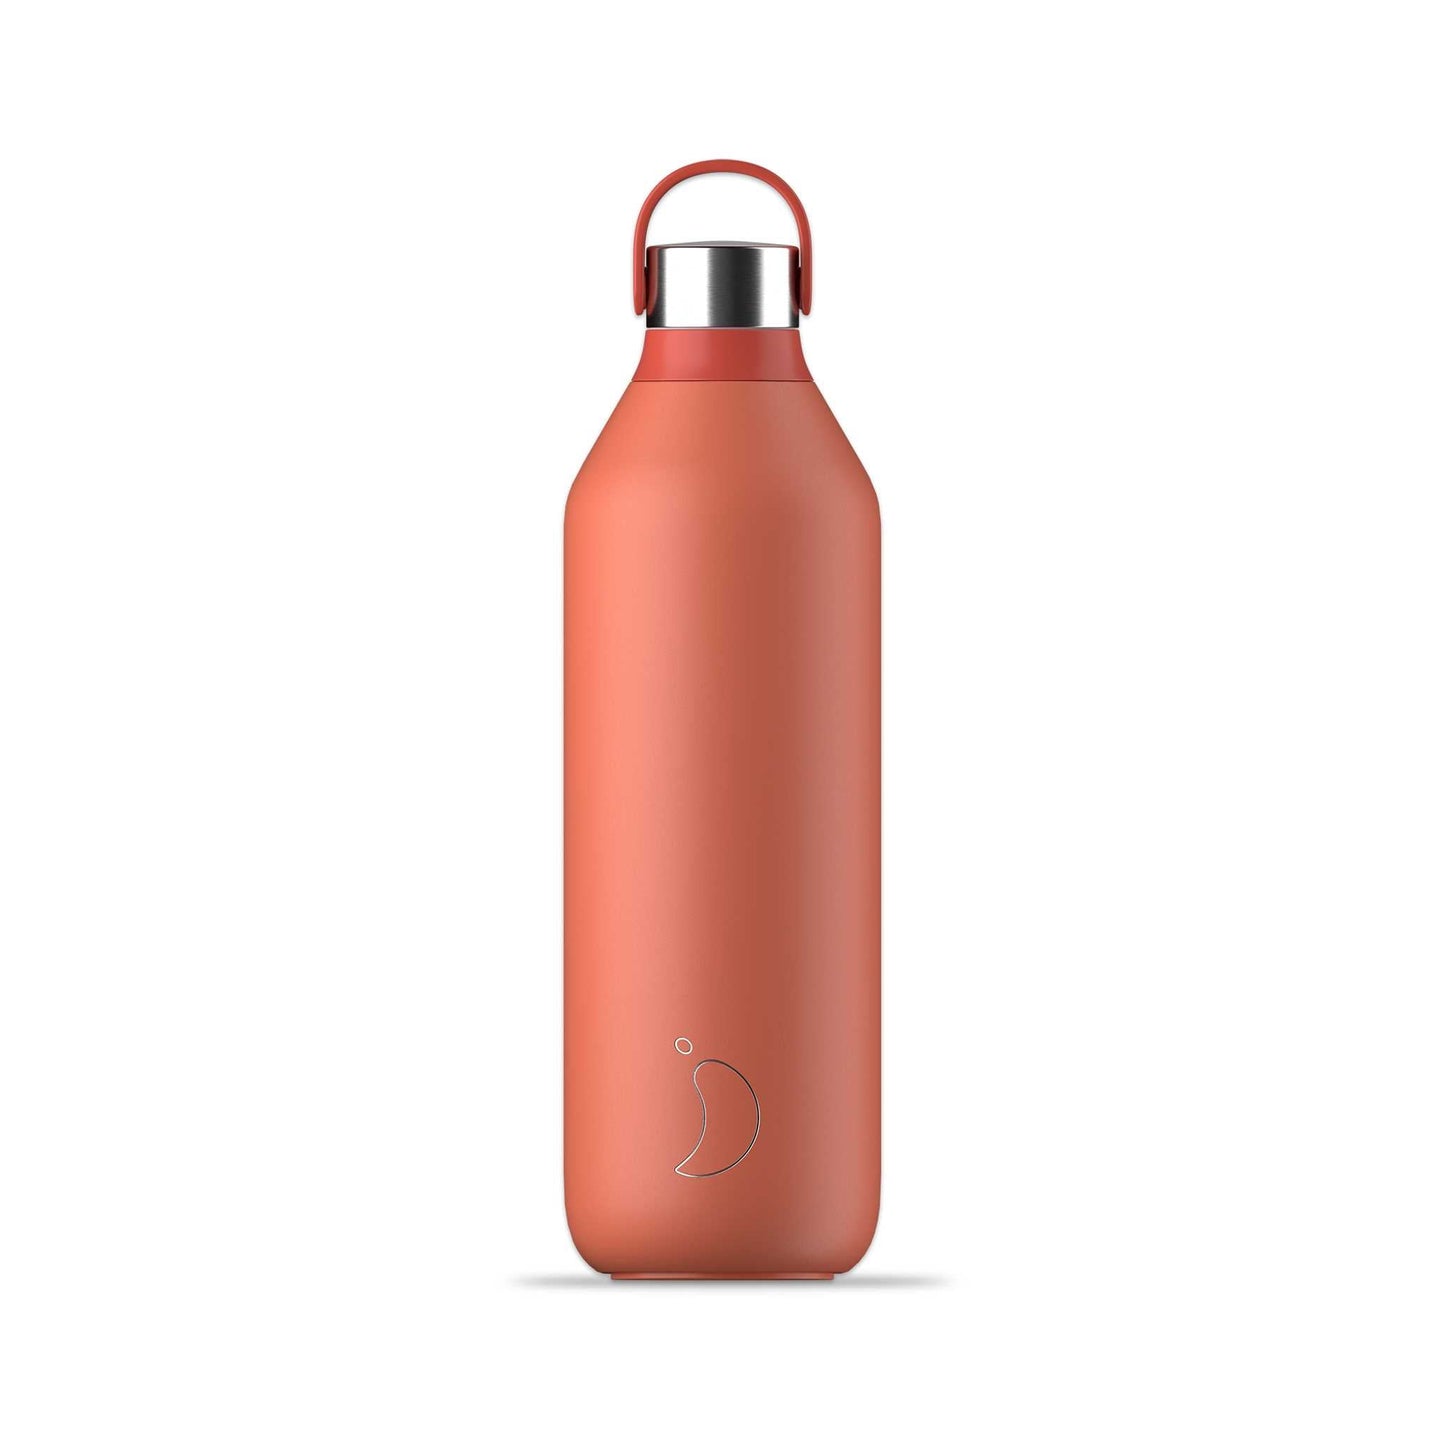 Chilly's Water Bottles Chilly's Series 2 Insulated Drinks Bottle - 1L - Maple Red